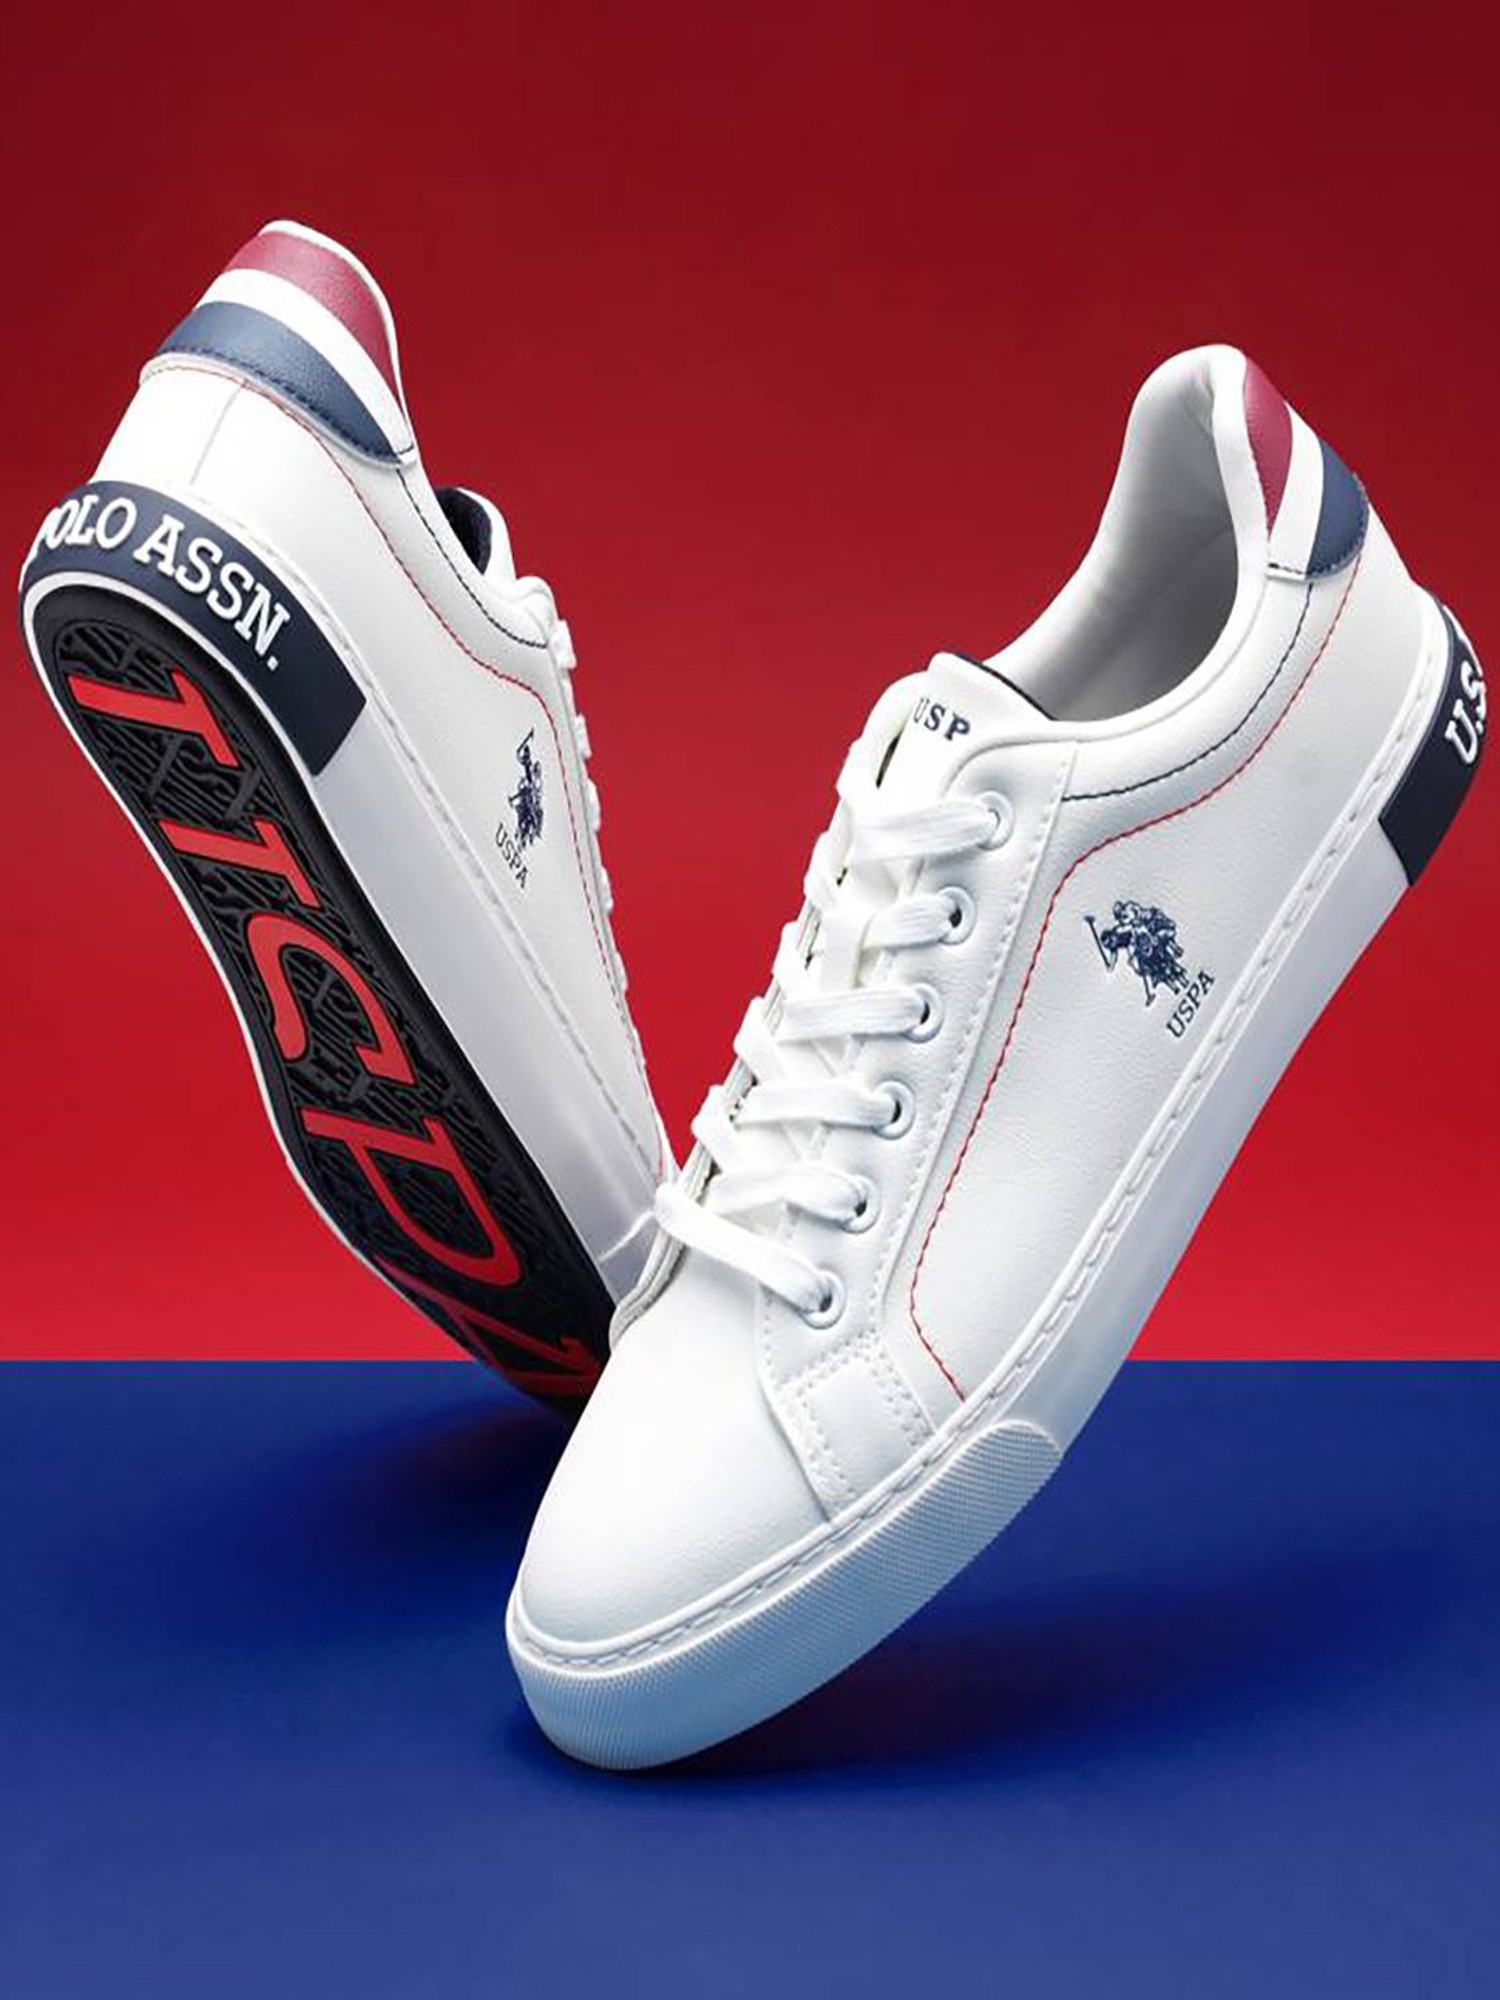 Share 244+ white sneakers us polo latest